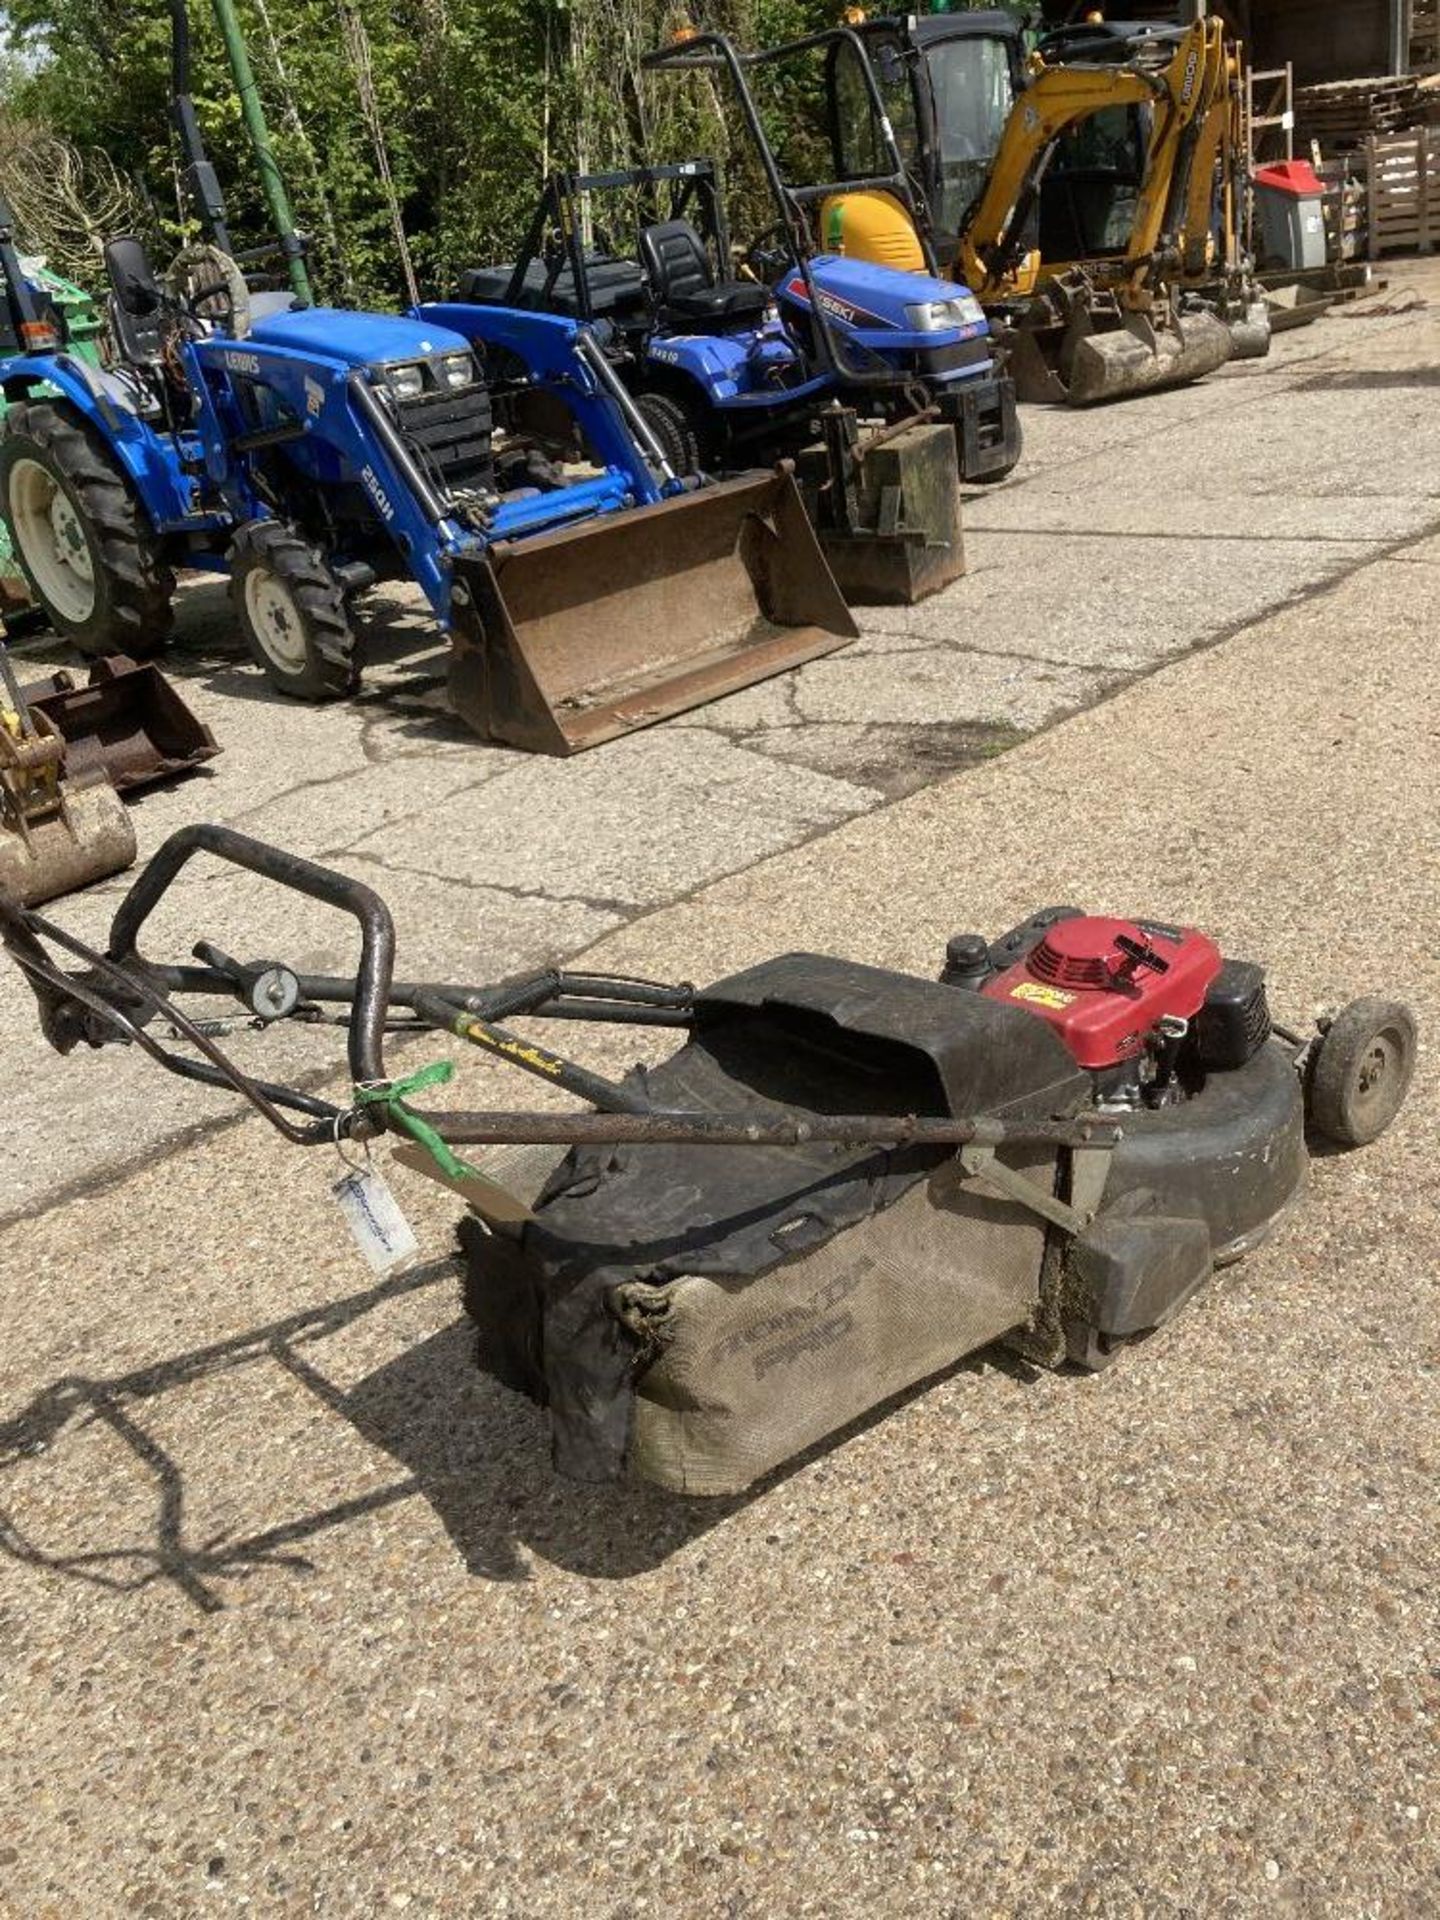 Honda HRH536 QXE Rotary Lawn Mower with Roller - Image 3 of 4